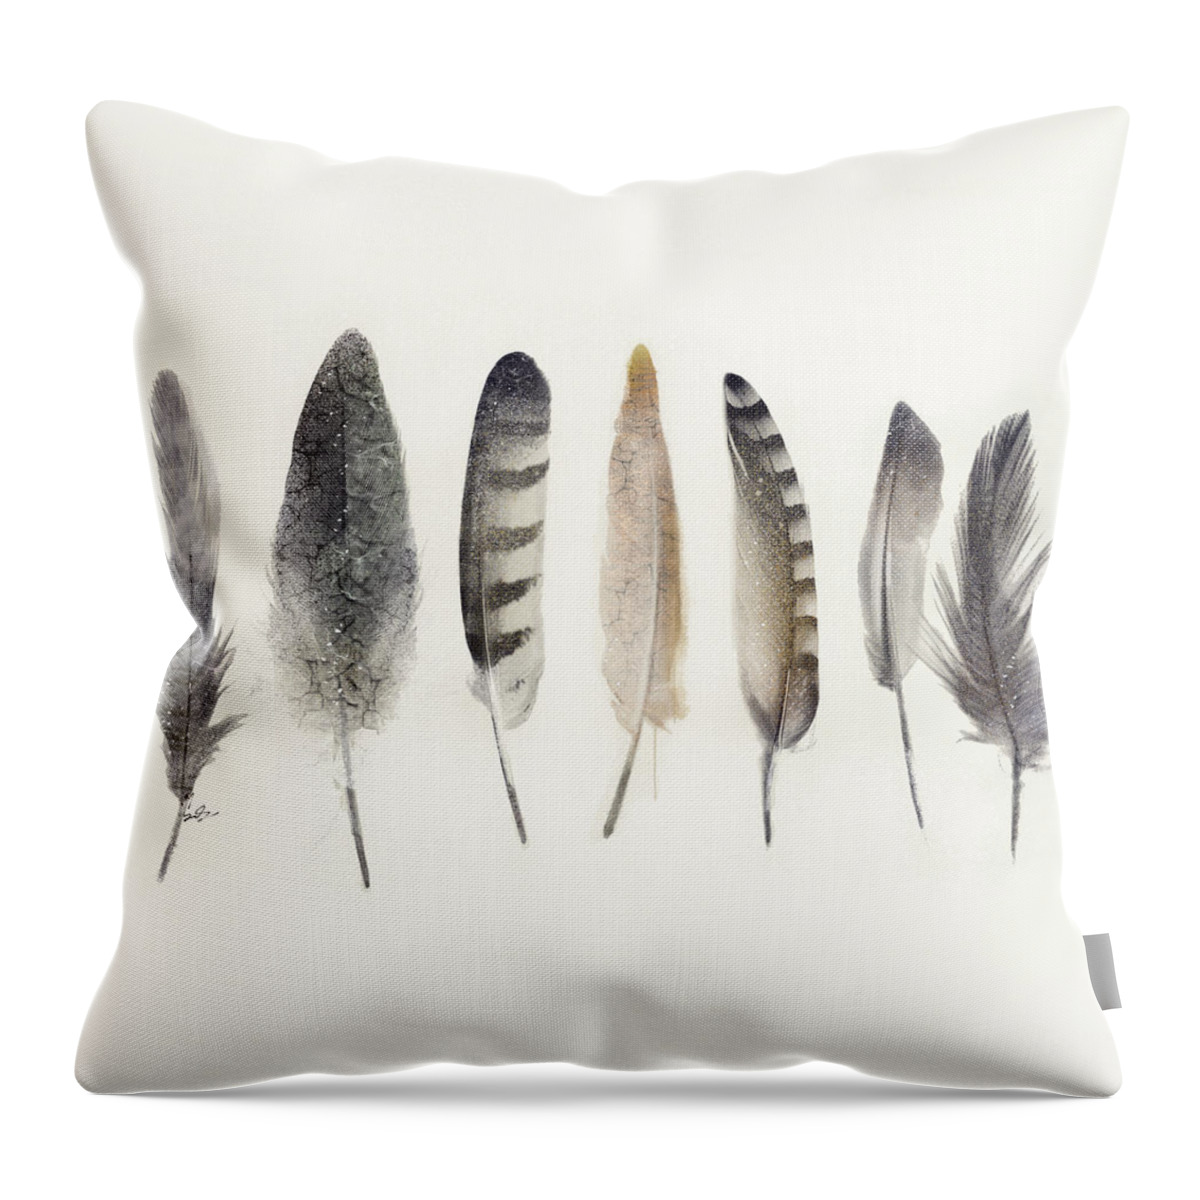 Feathers Throw Pillow featuring the painting Native Earth by Bri Buckley